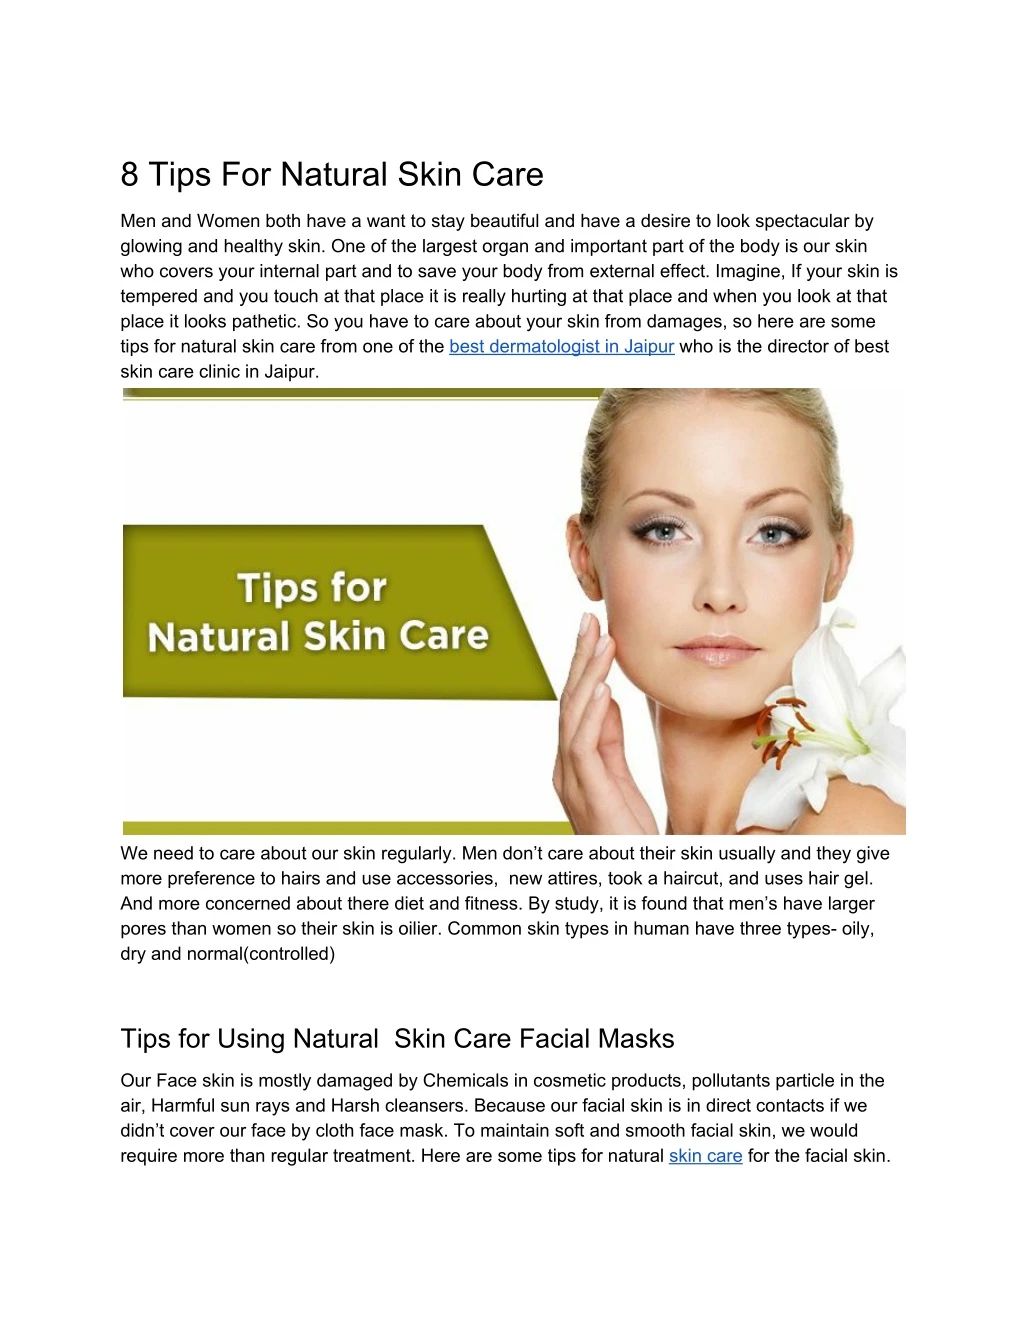 8 tips for natural skin care